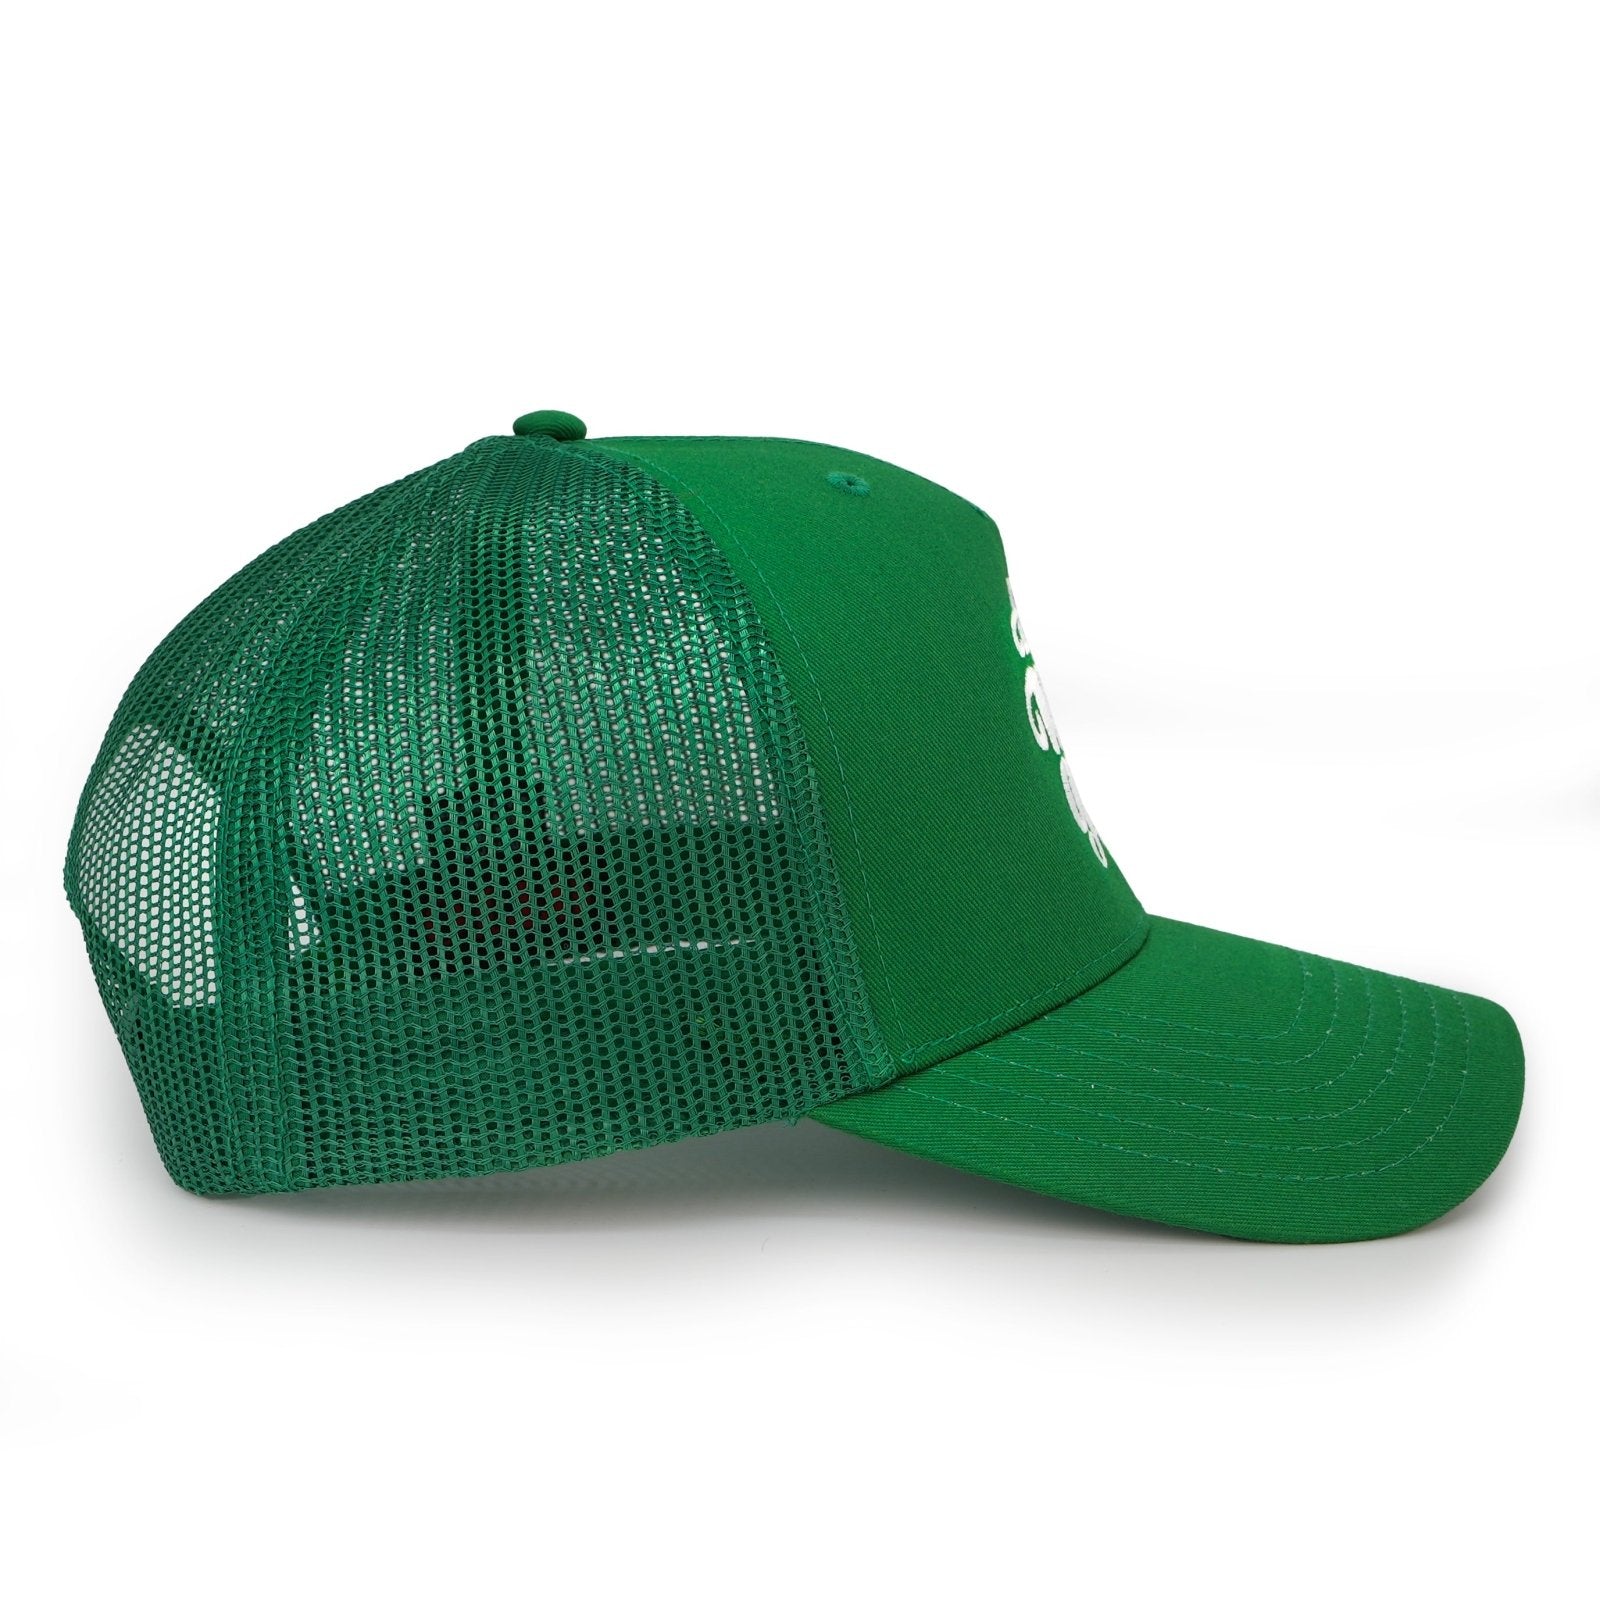 Have A Nice Day Green Snapback - Hat